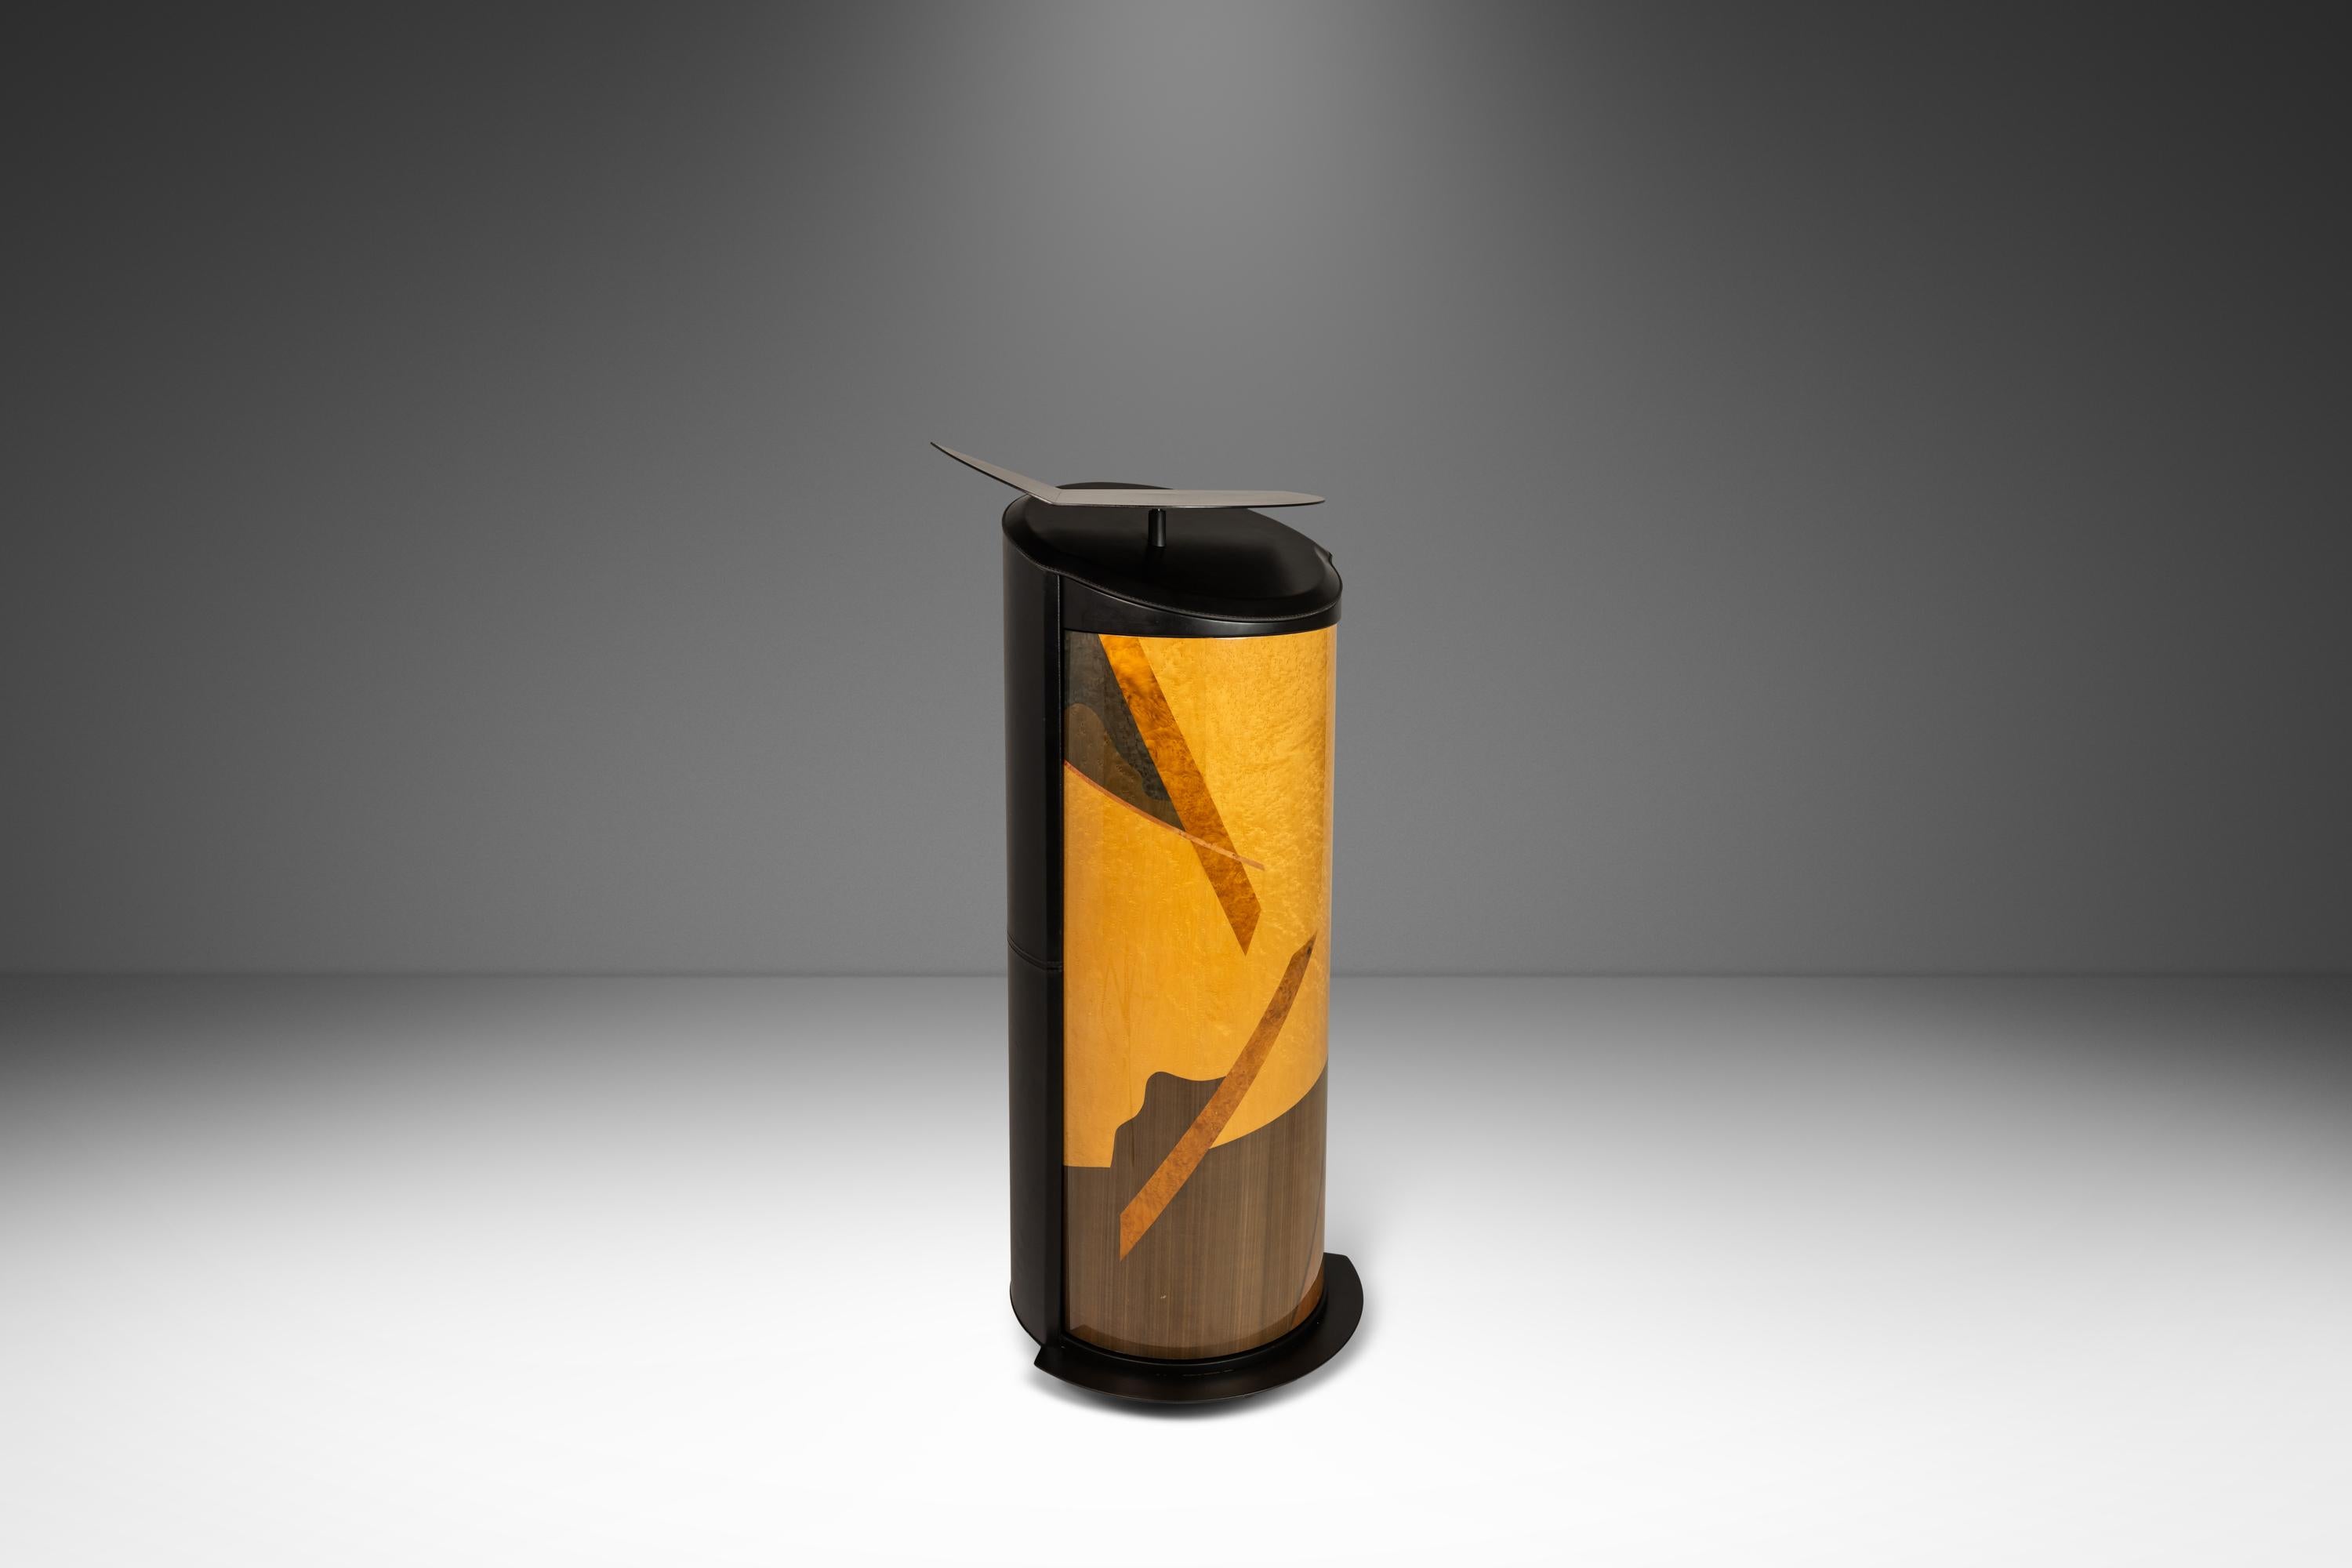 Rare Italian Geometric Dry Totem Bar by Giovanni Offredi for Saporiti, Italy, c. 1990's

About: Introducing a true Italian Modern masterpiece: a rare totem dry bar, designed by the incomparable Giovanni Offredi for the renowned furniture maker